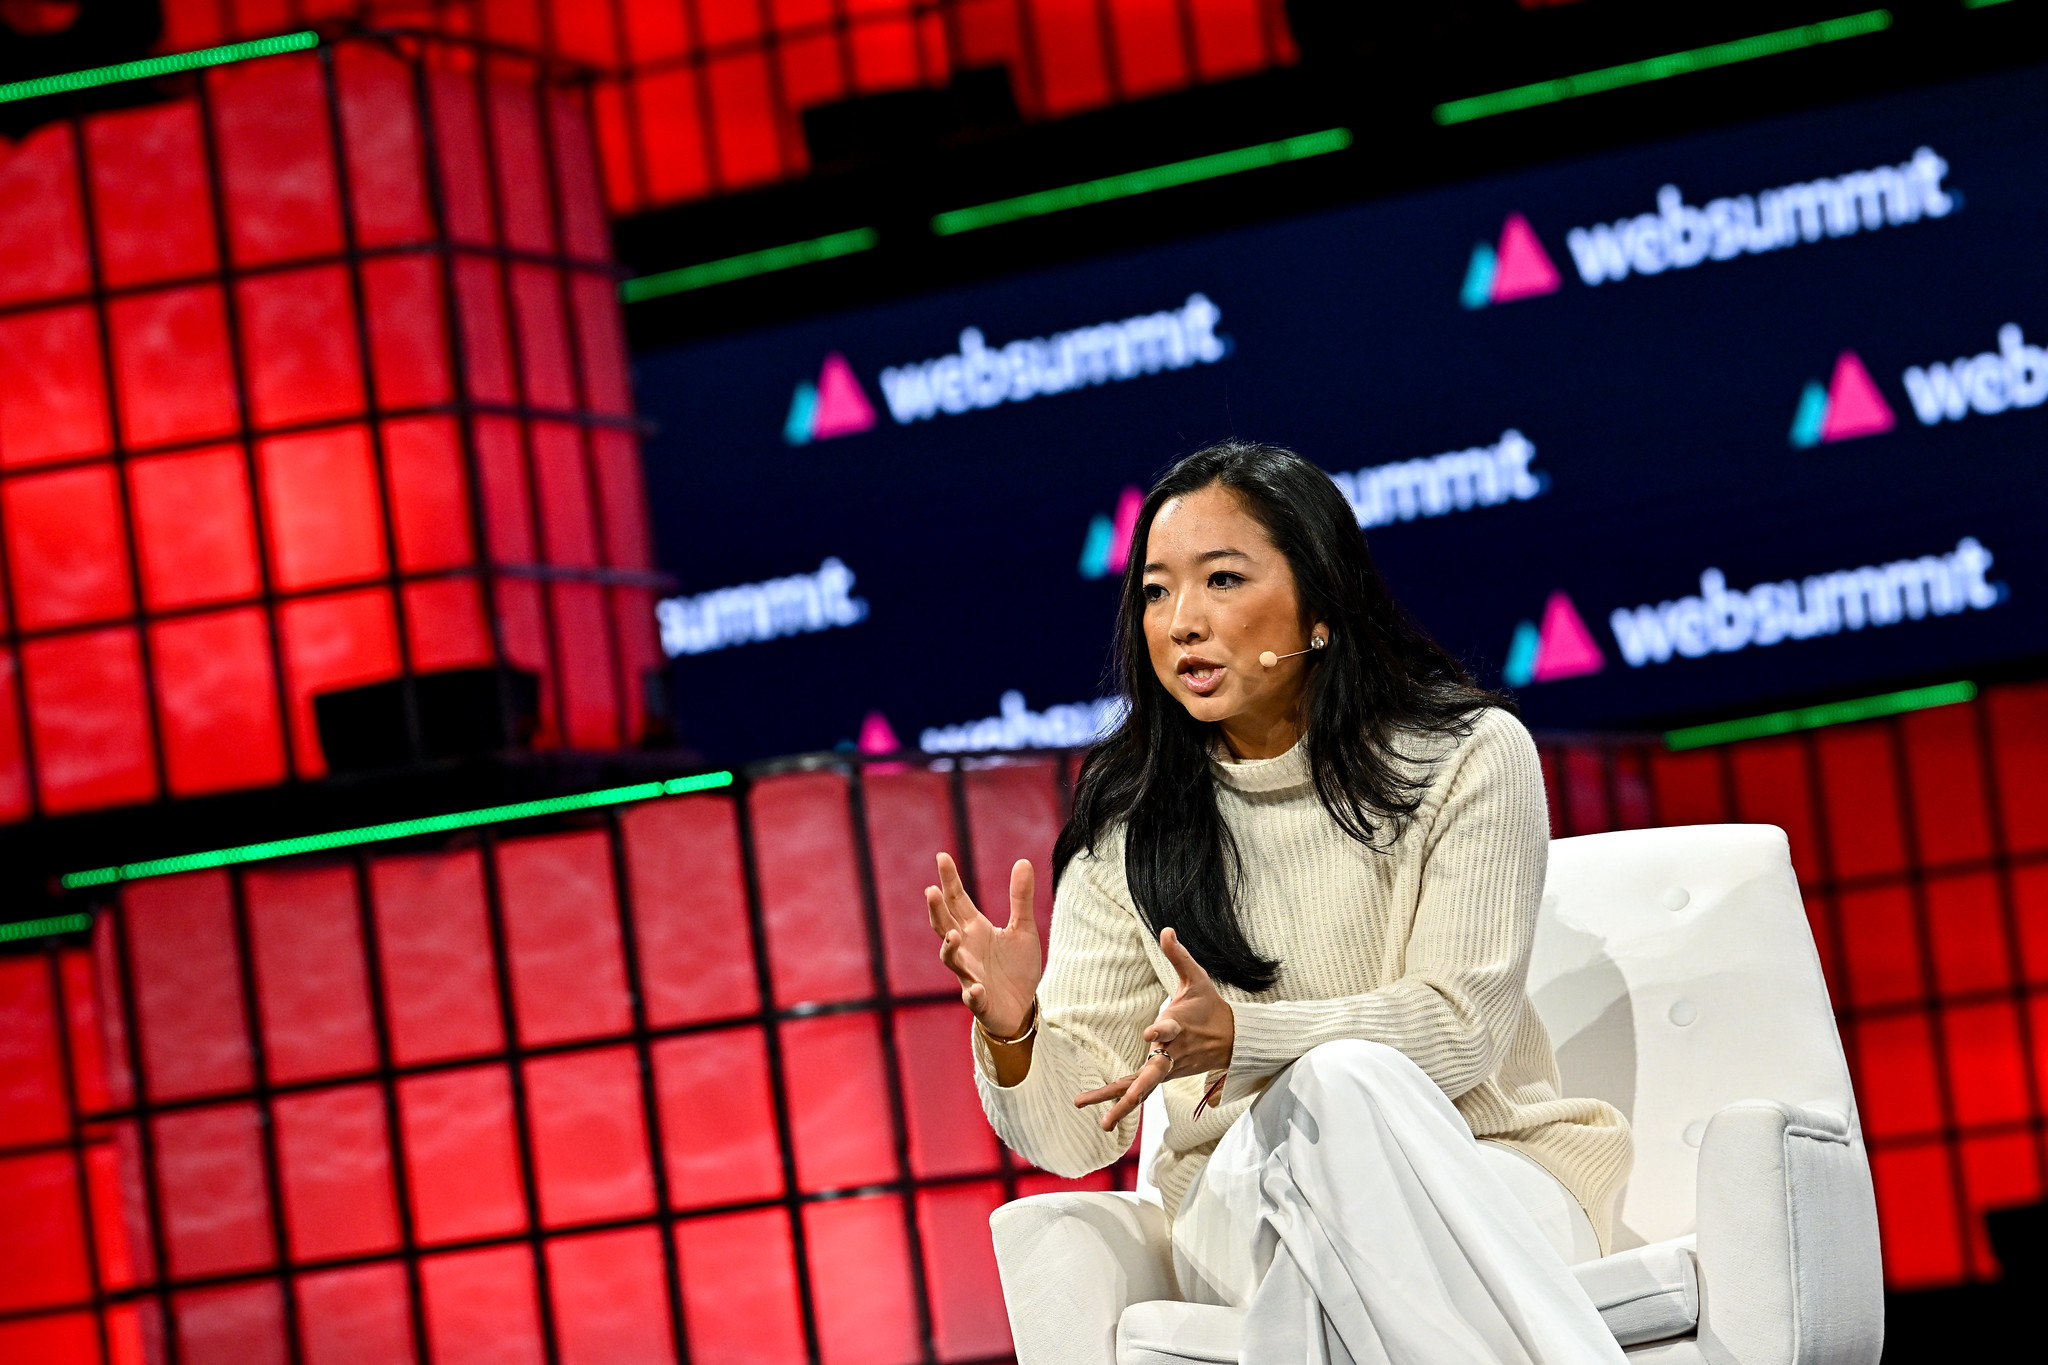 A photograph of Sita Chantramonklasri, founder and general partner of Siam Capital, speaking on Centre Stage at Web Summit. Sita is sitting on an armchair and appears to be wearing an on-ear microphone. Sita appears to be speaking to a crowd, and is gesturing using their hands. The Web Summit logo appears on a screen in the background.